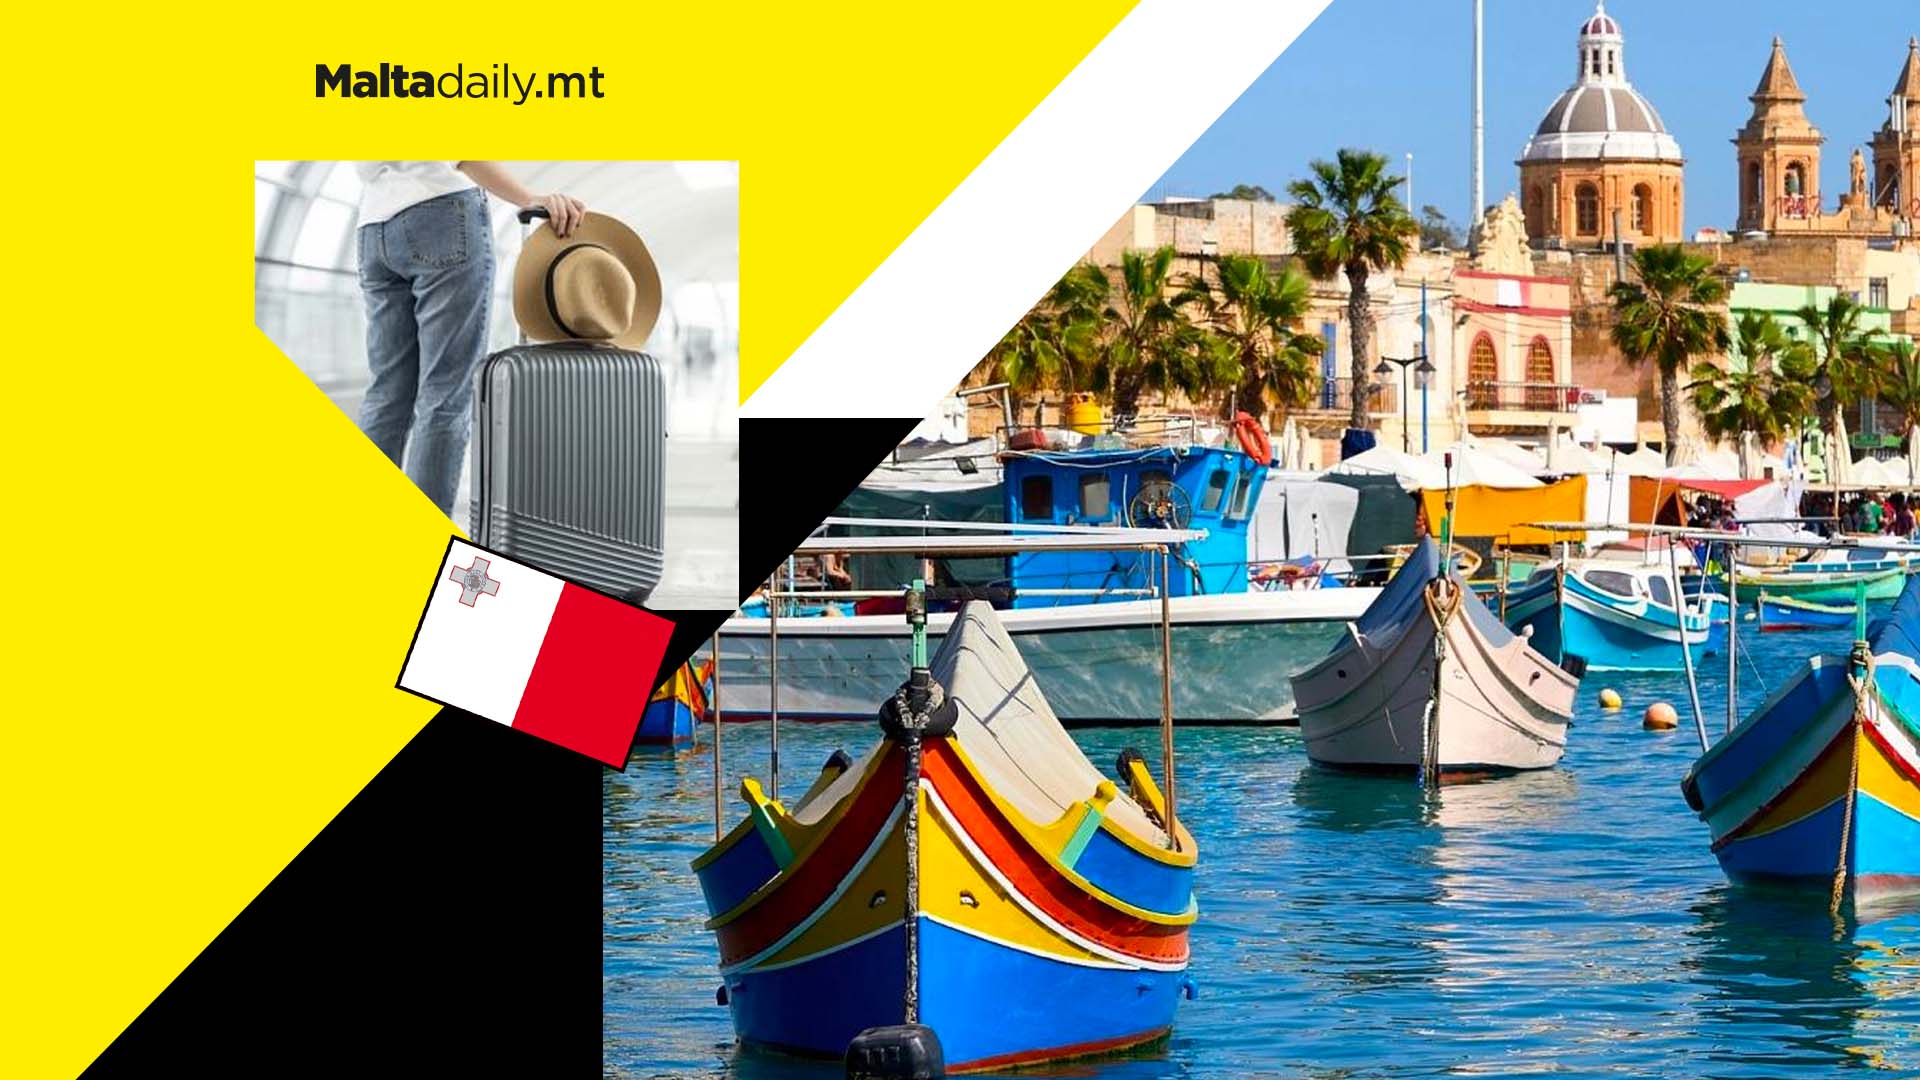 Around 1 million tourists came to Malta in 2021 as sector improves